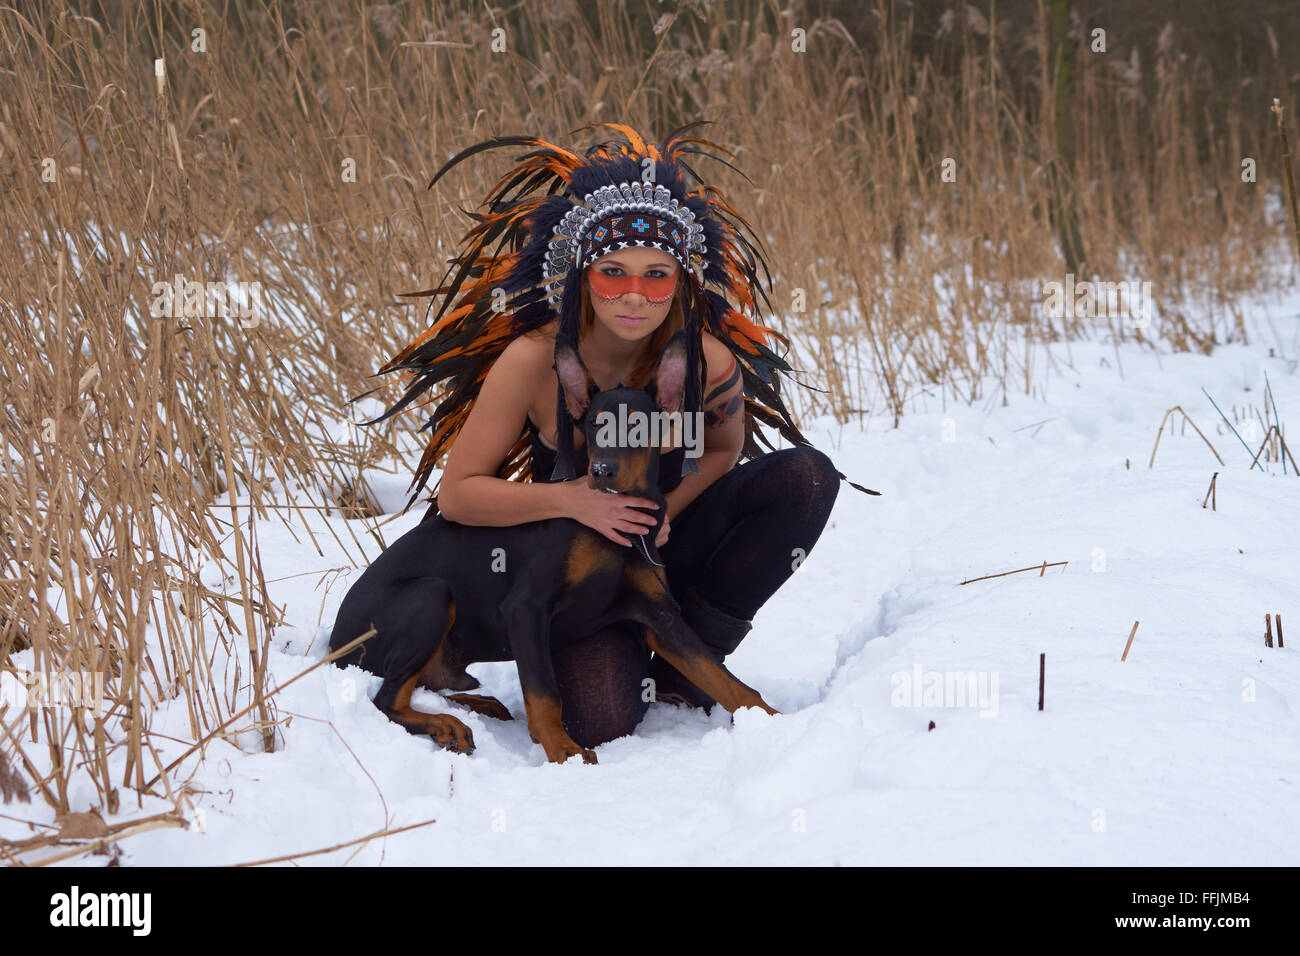 Girl in native american headdress with Doderman Pinscher Stock Photo